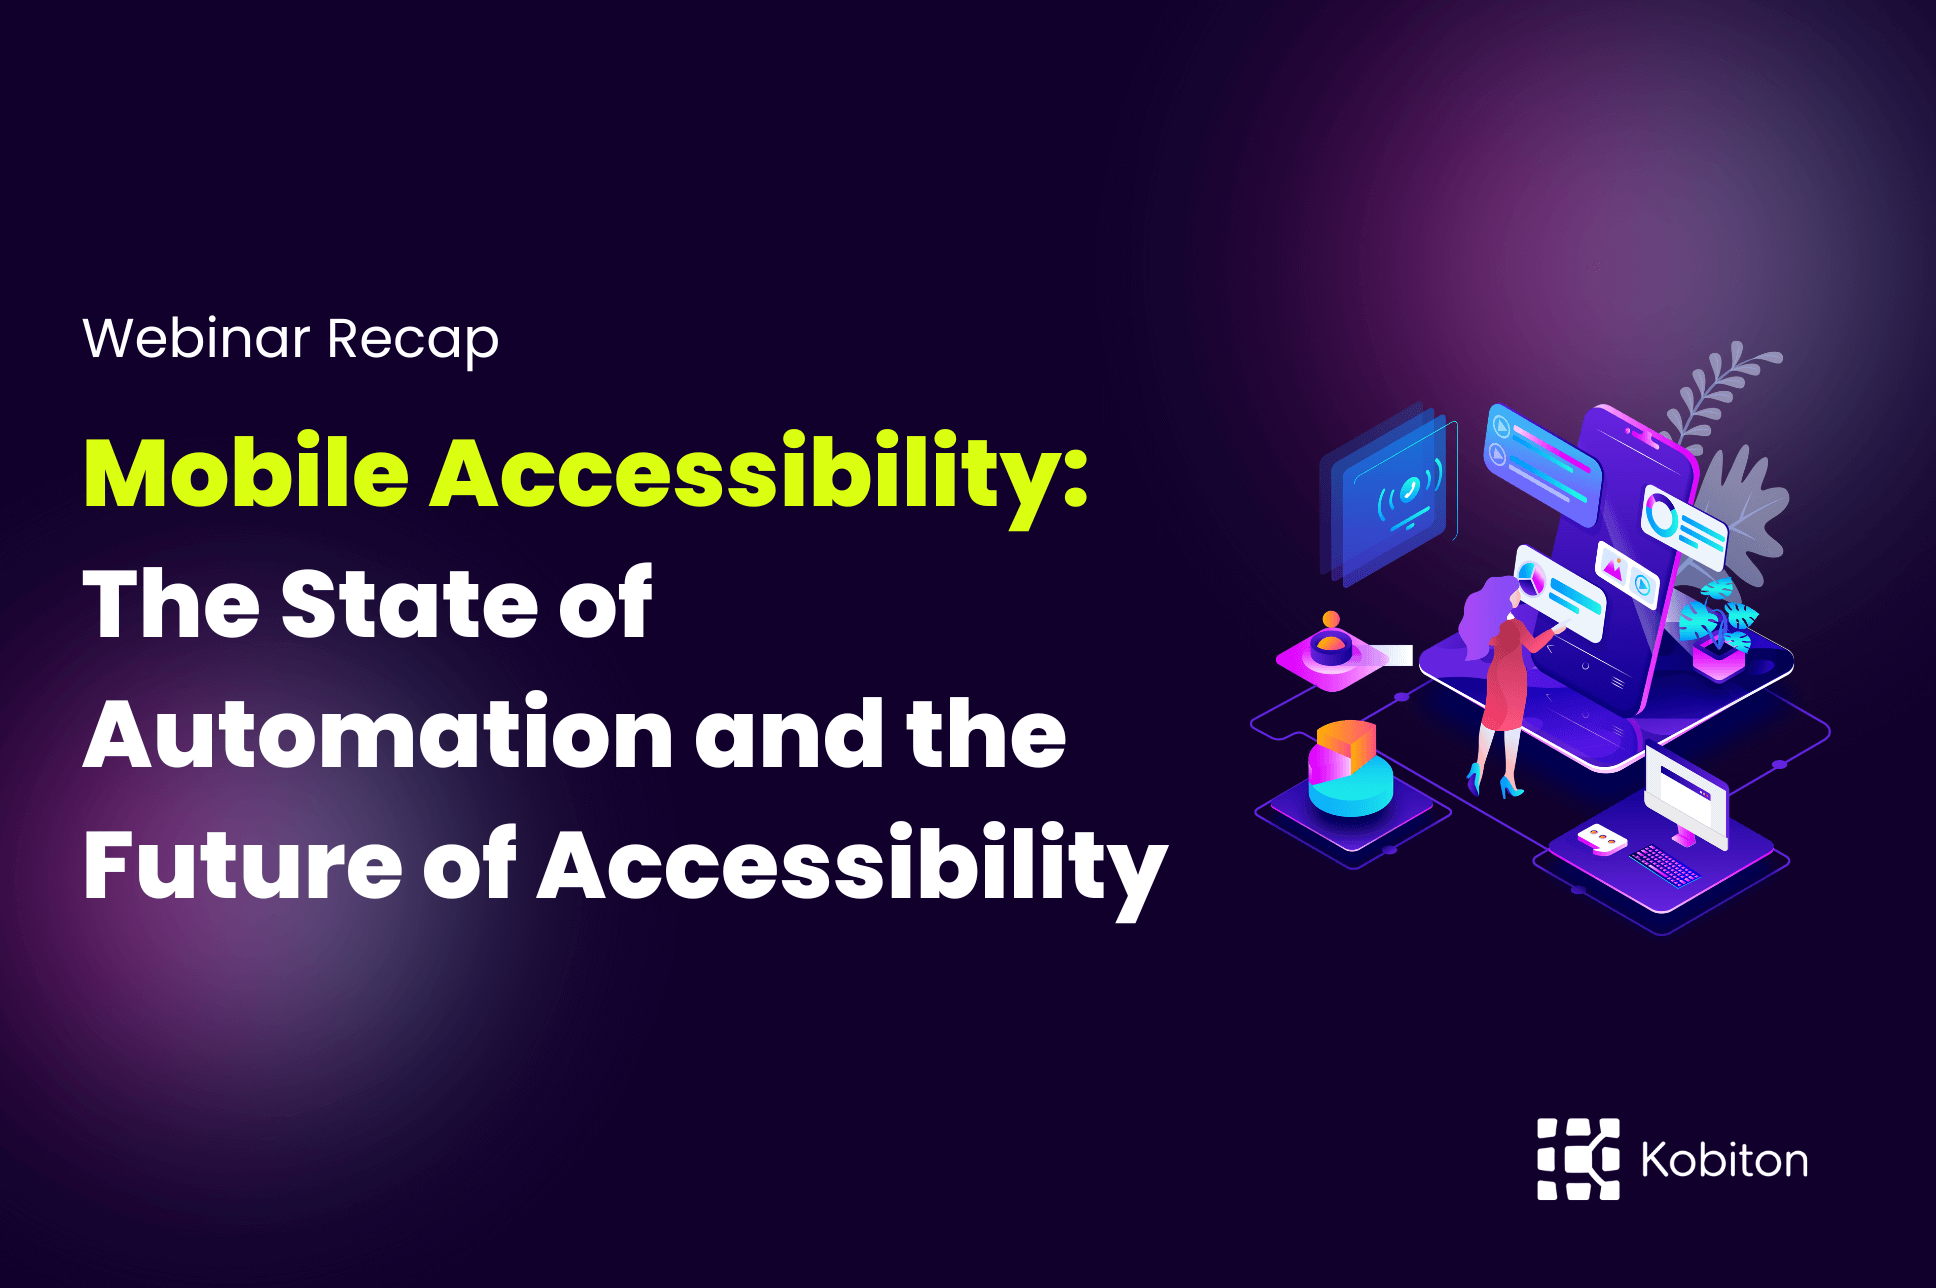 Webinar Recap Mobile Accessibility: The state of automation and the future of accessibilty